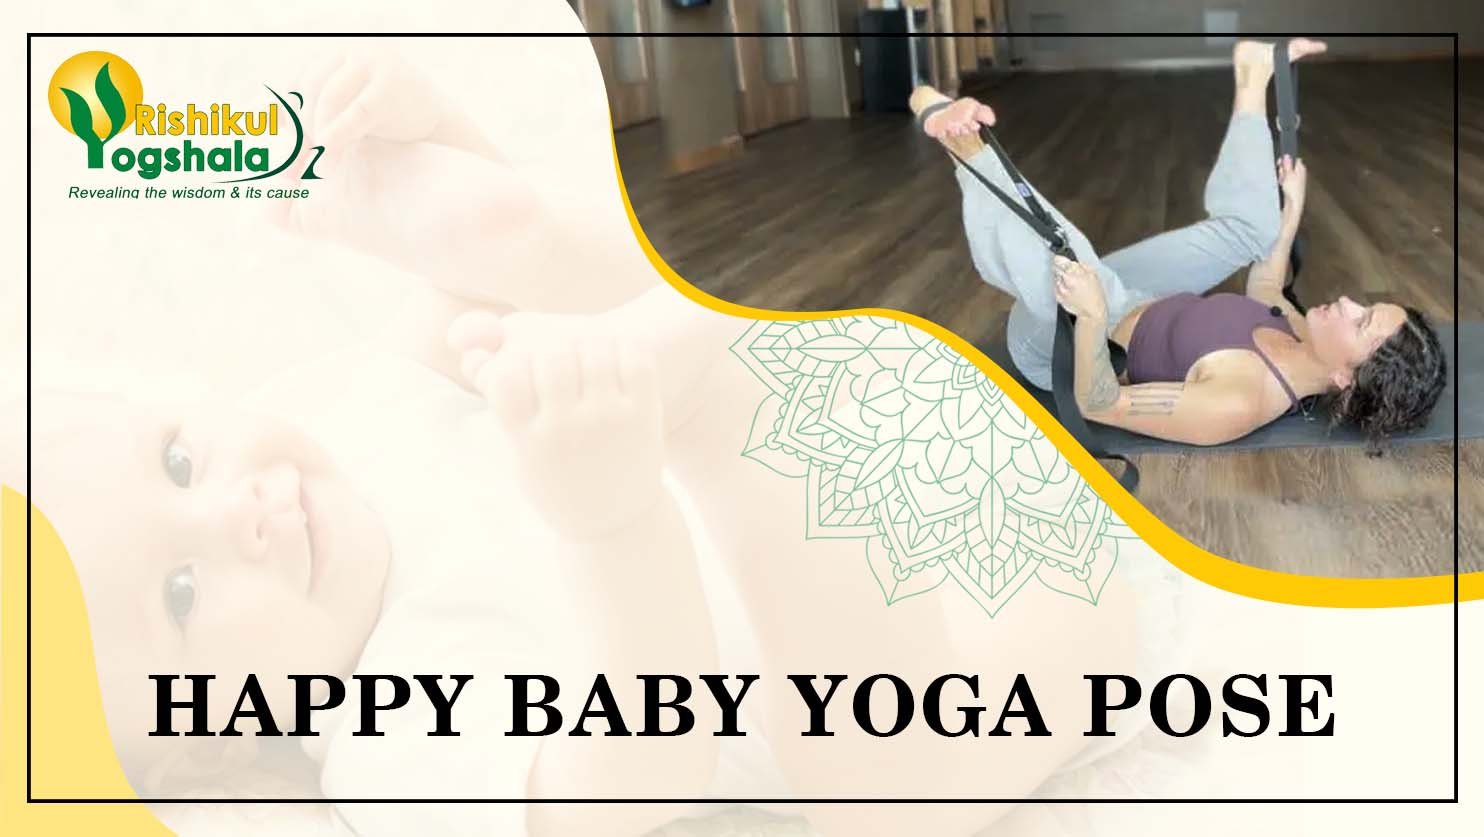 Benefits of baby yoga aren't a stretch: How it helps moms and babies - Good  Morning America